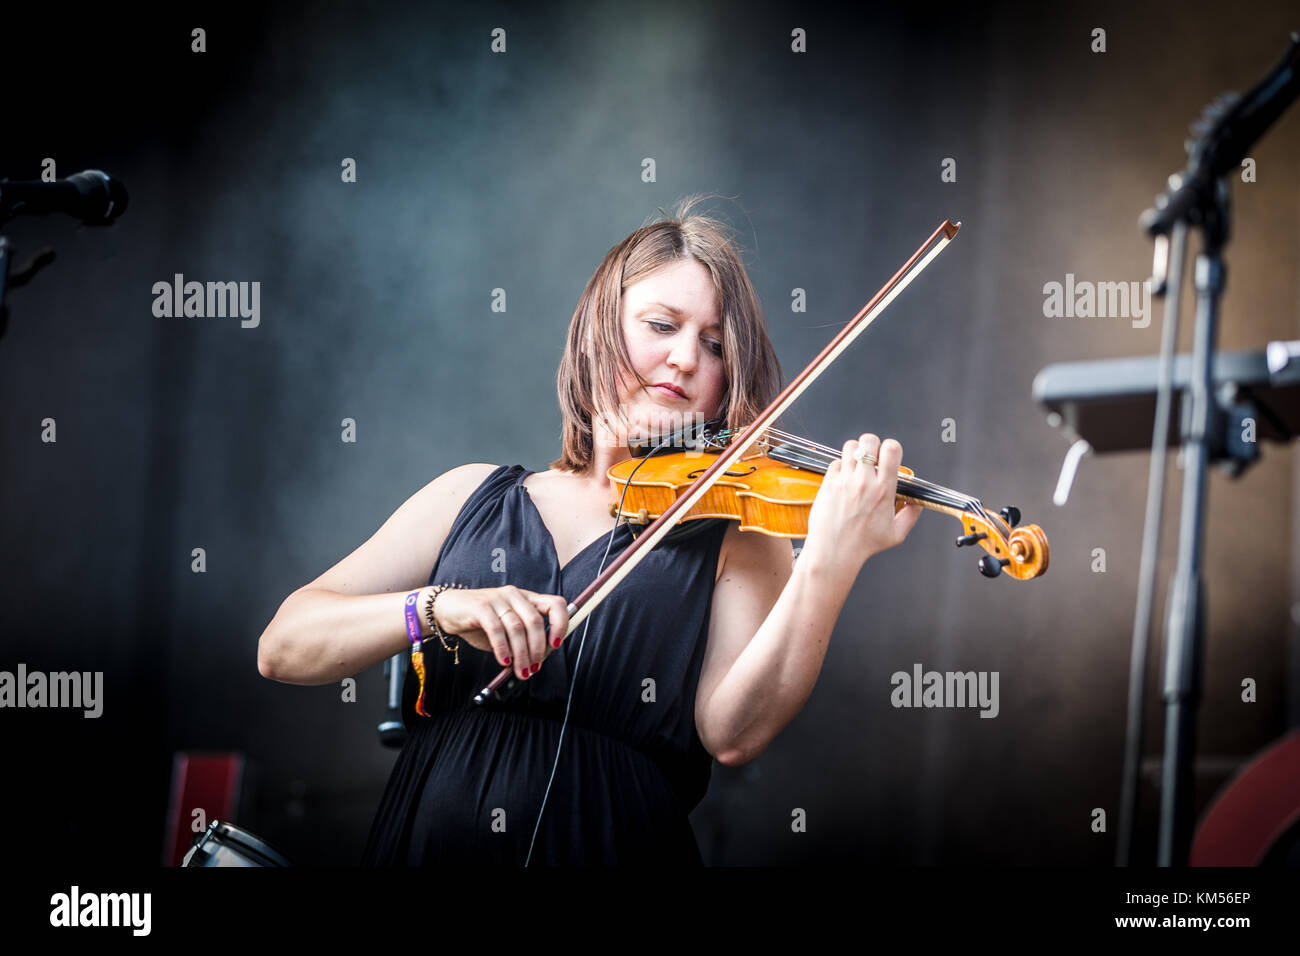 The German indie rock band Get Well Soon performs a live concert at the German music festival Open Source Festival 2016 in Düsseldorf. Here musician Verena Gropper is seen live on stage. Germany, 09/07 2016. Stock Photo